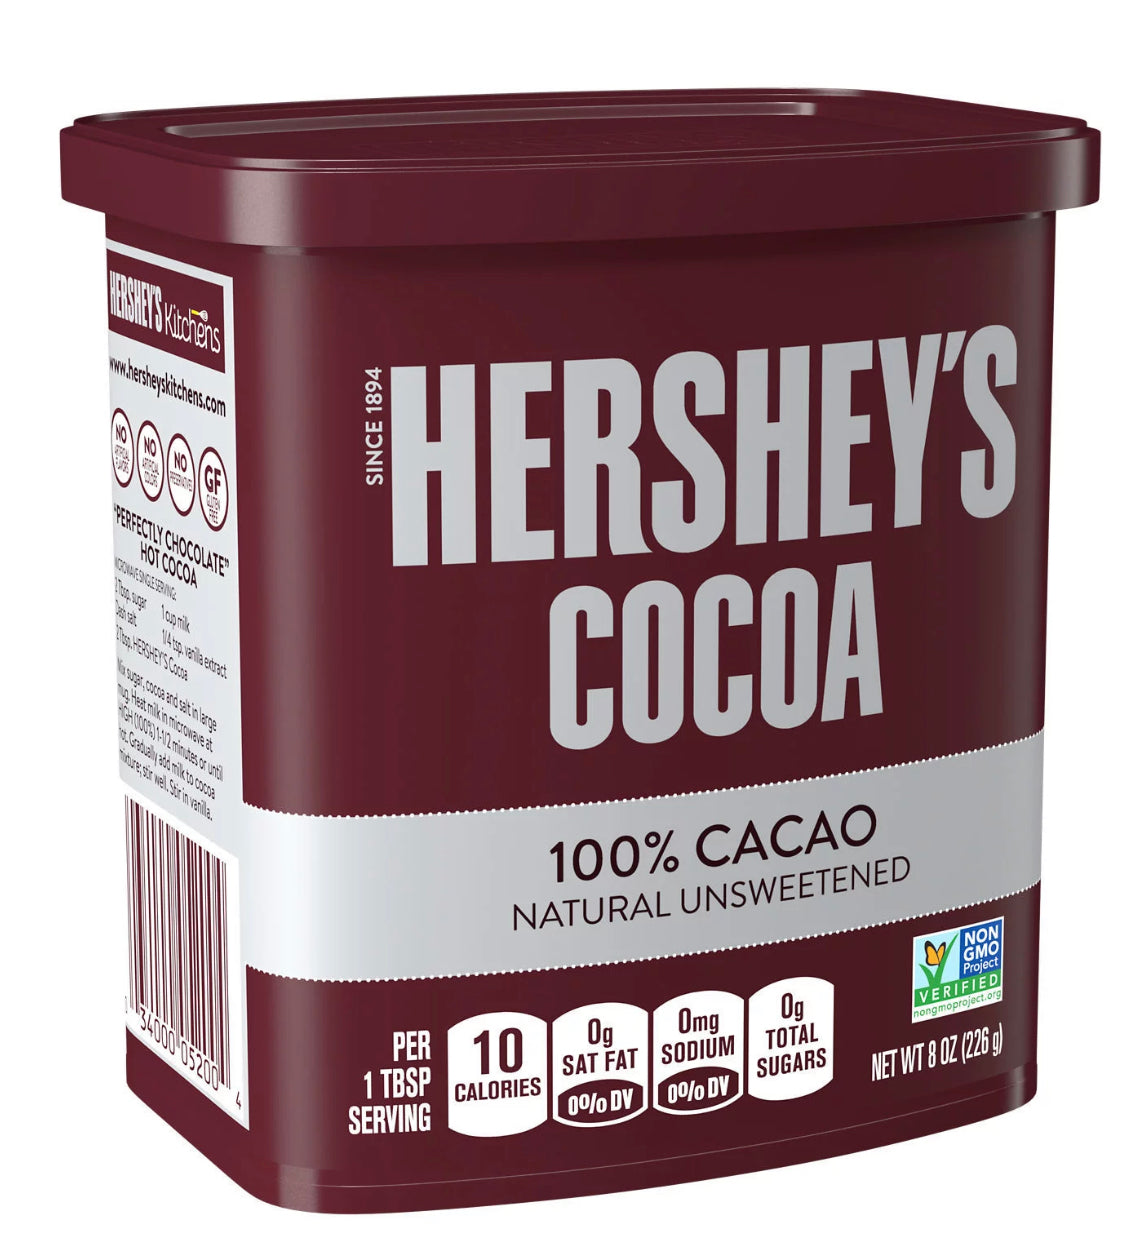 Hershey's Cocoa 100% Cacao Natural Unsweetened 8oz